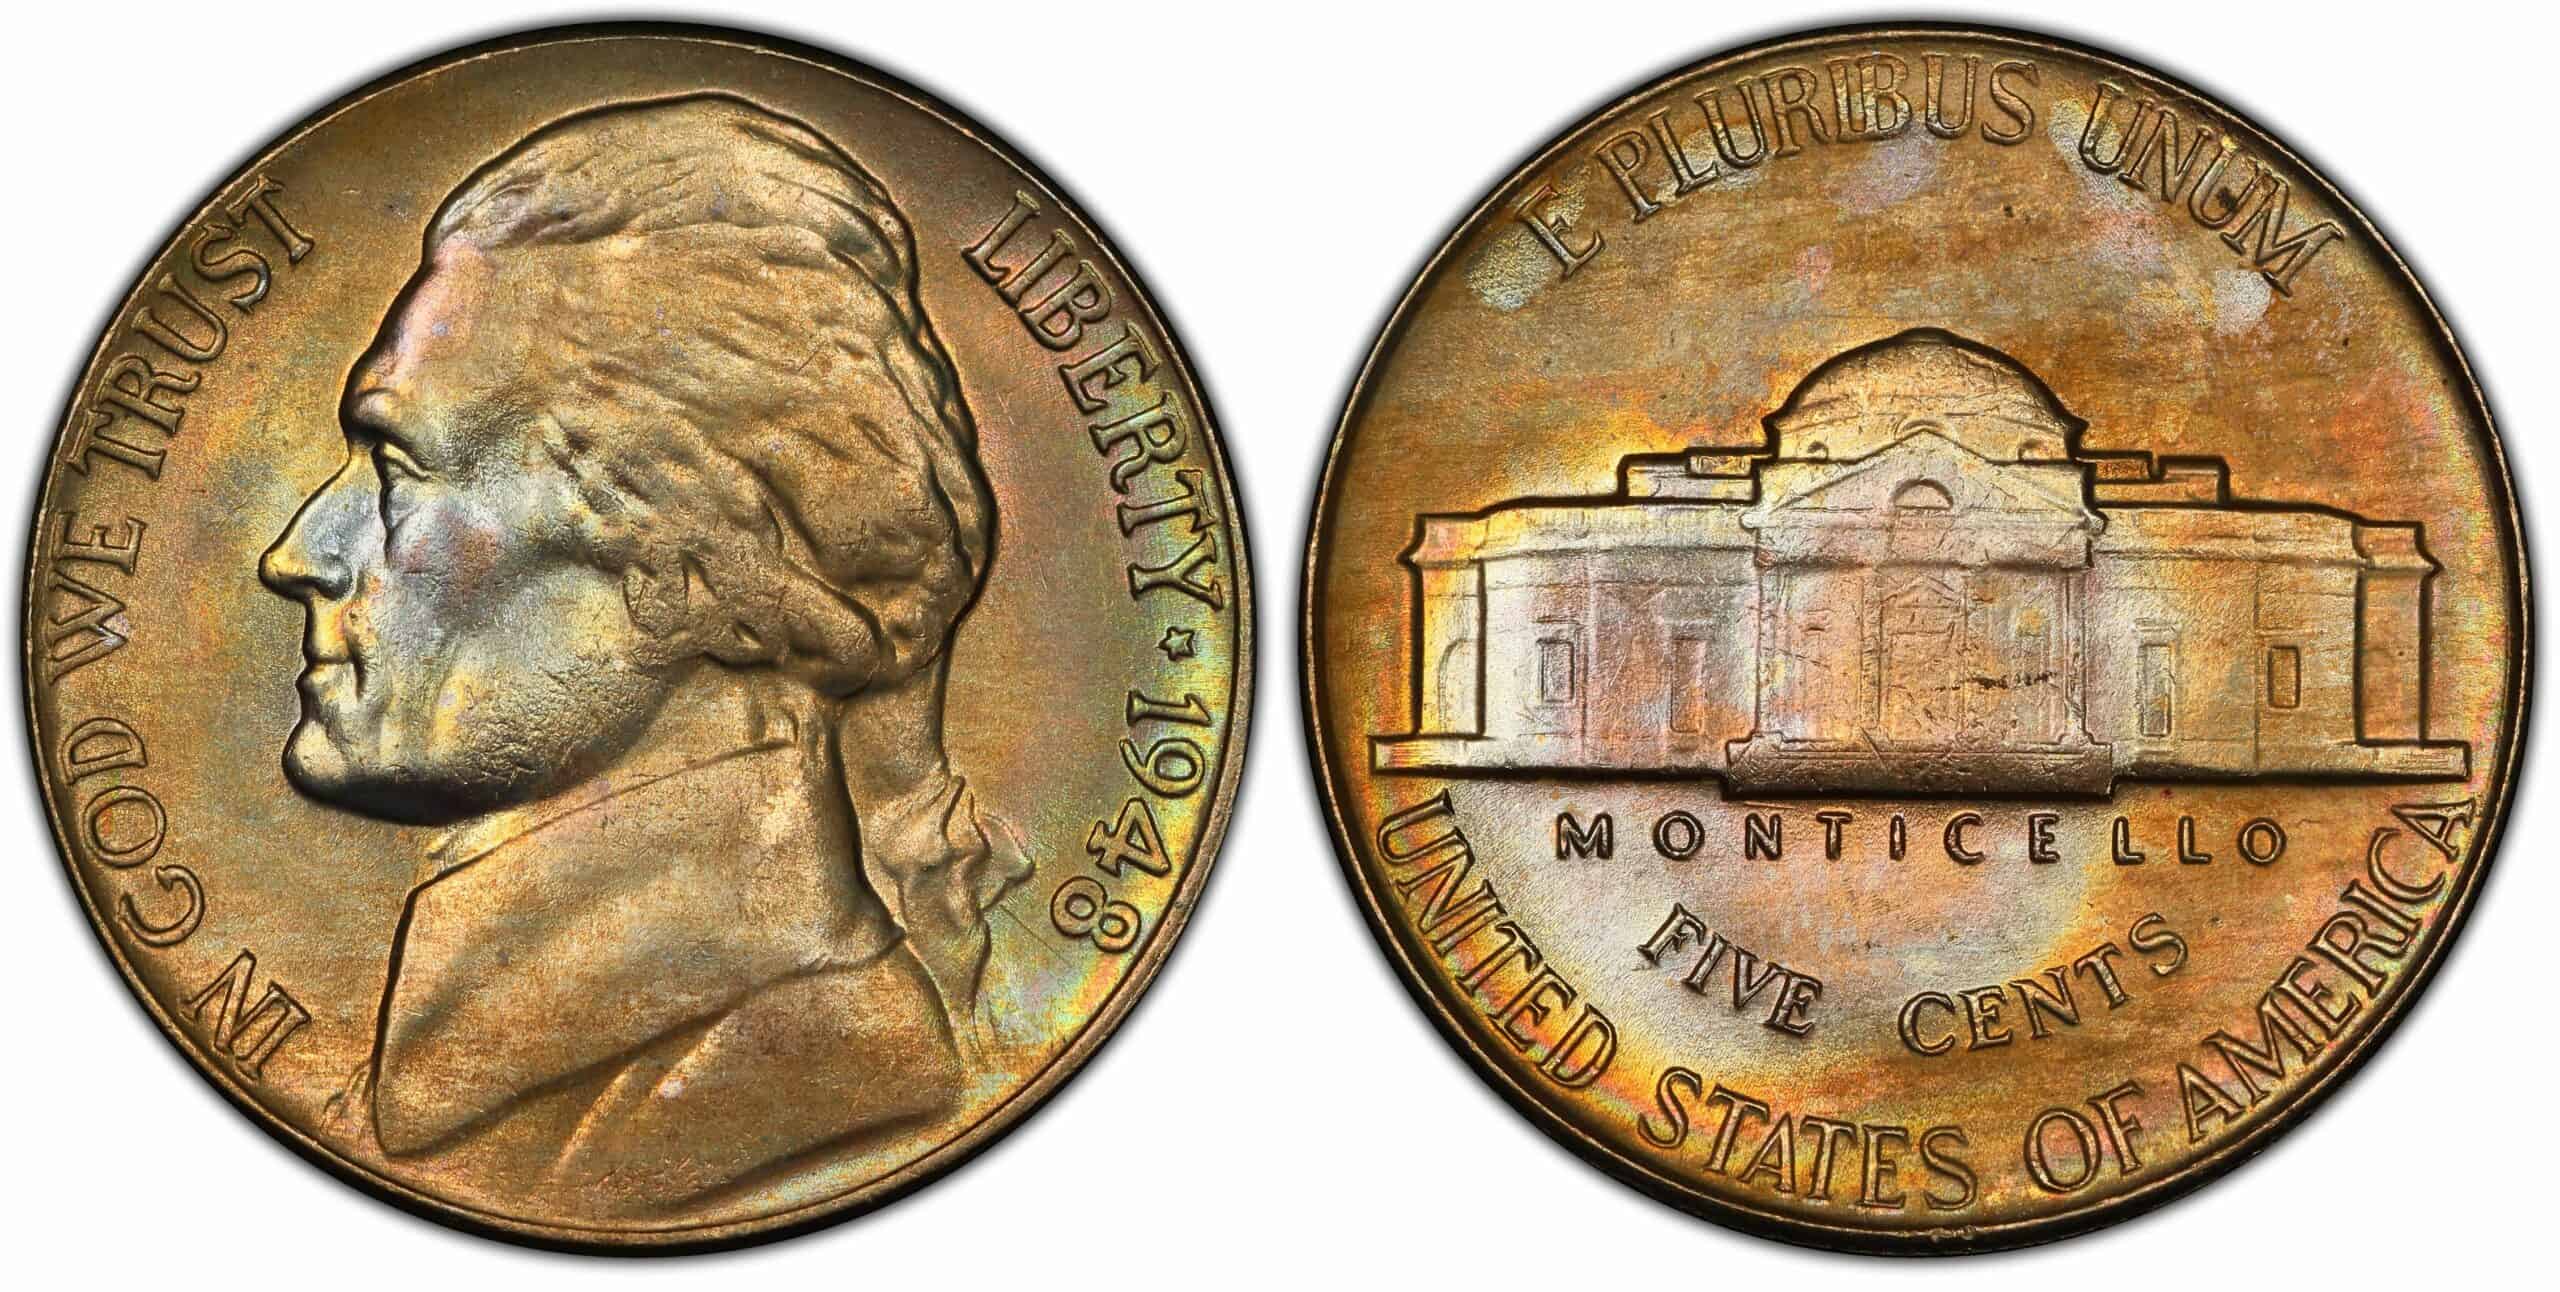 1948 Nickel Value: are “D”, “S”, No mint mark worth money?